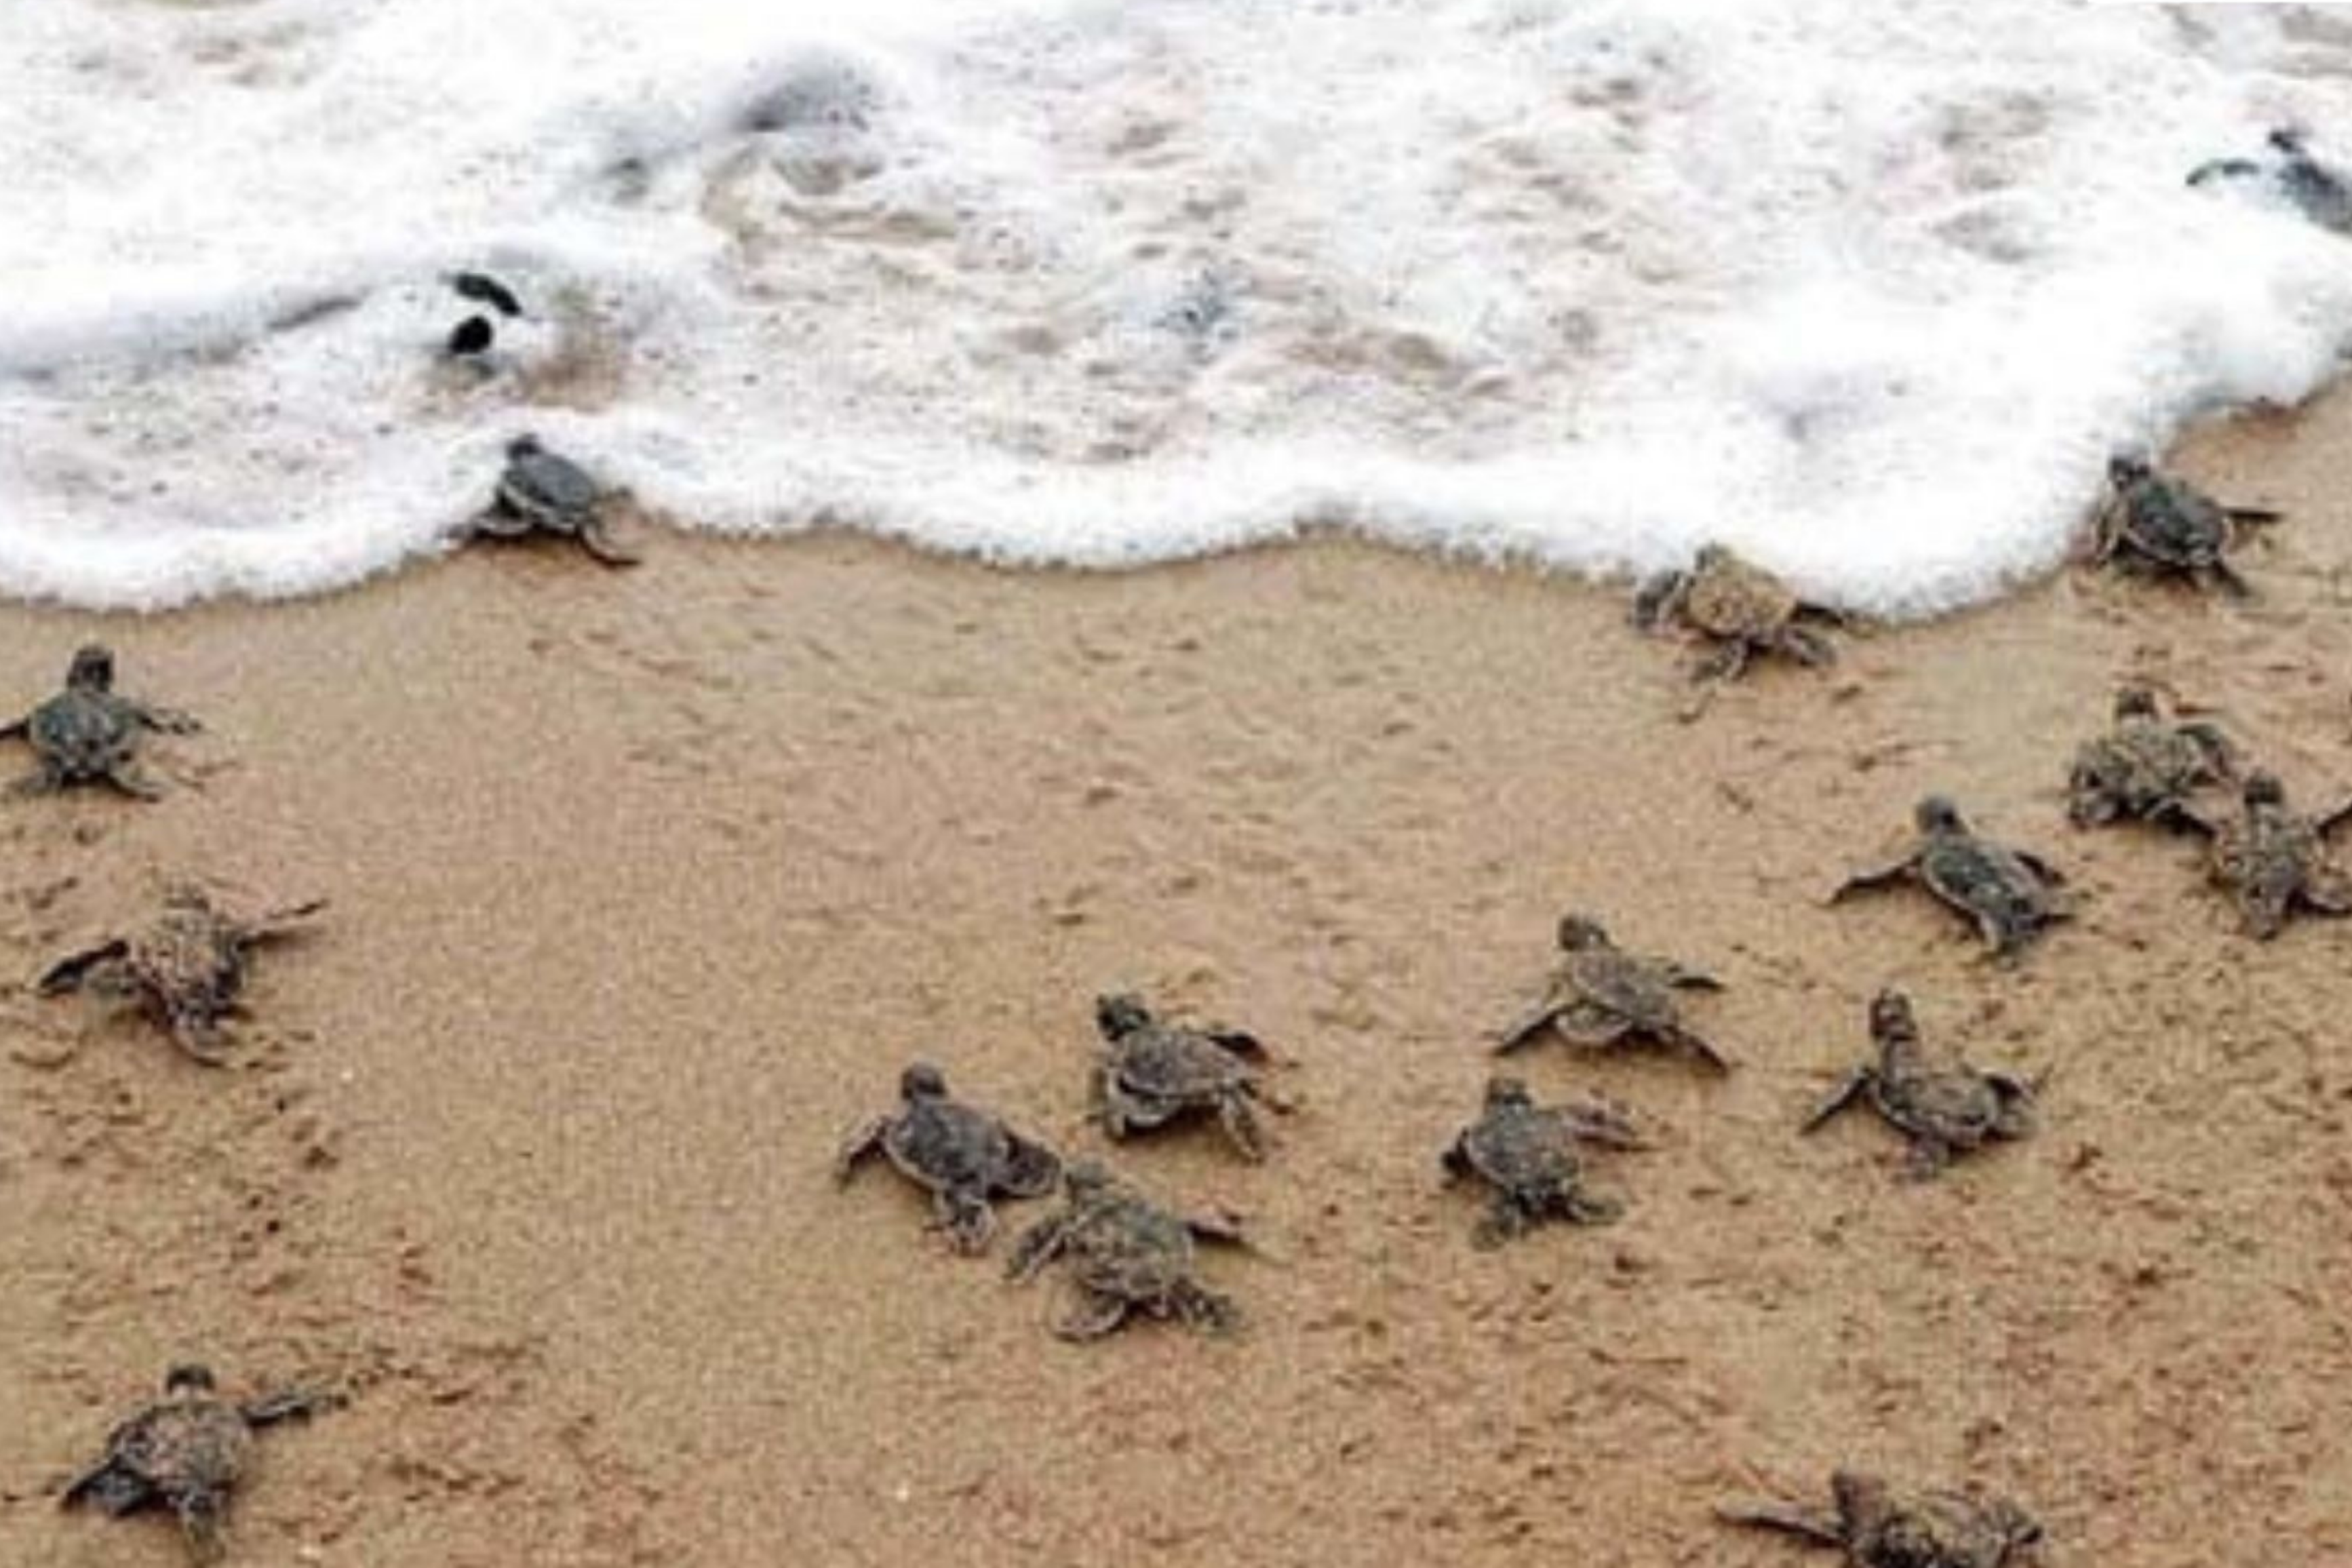 How Can an ACR Data Logger Help Protect Sea Turtles?